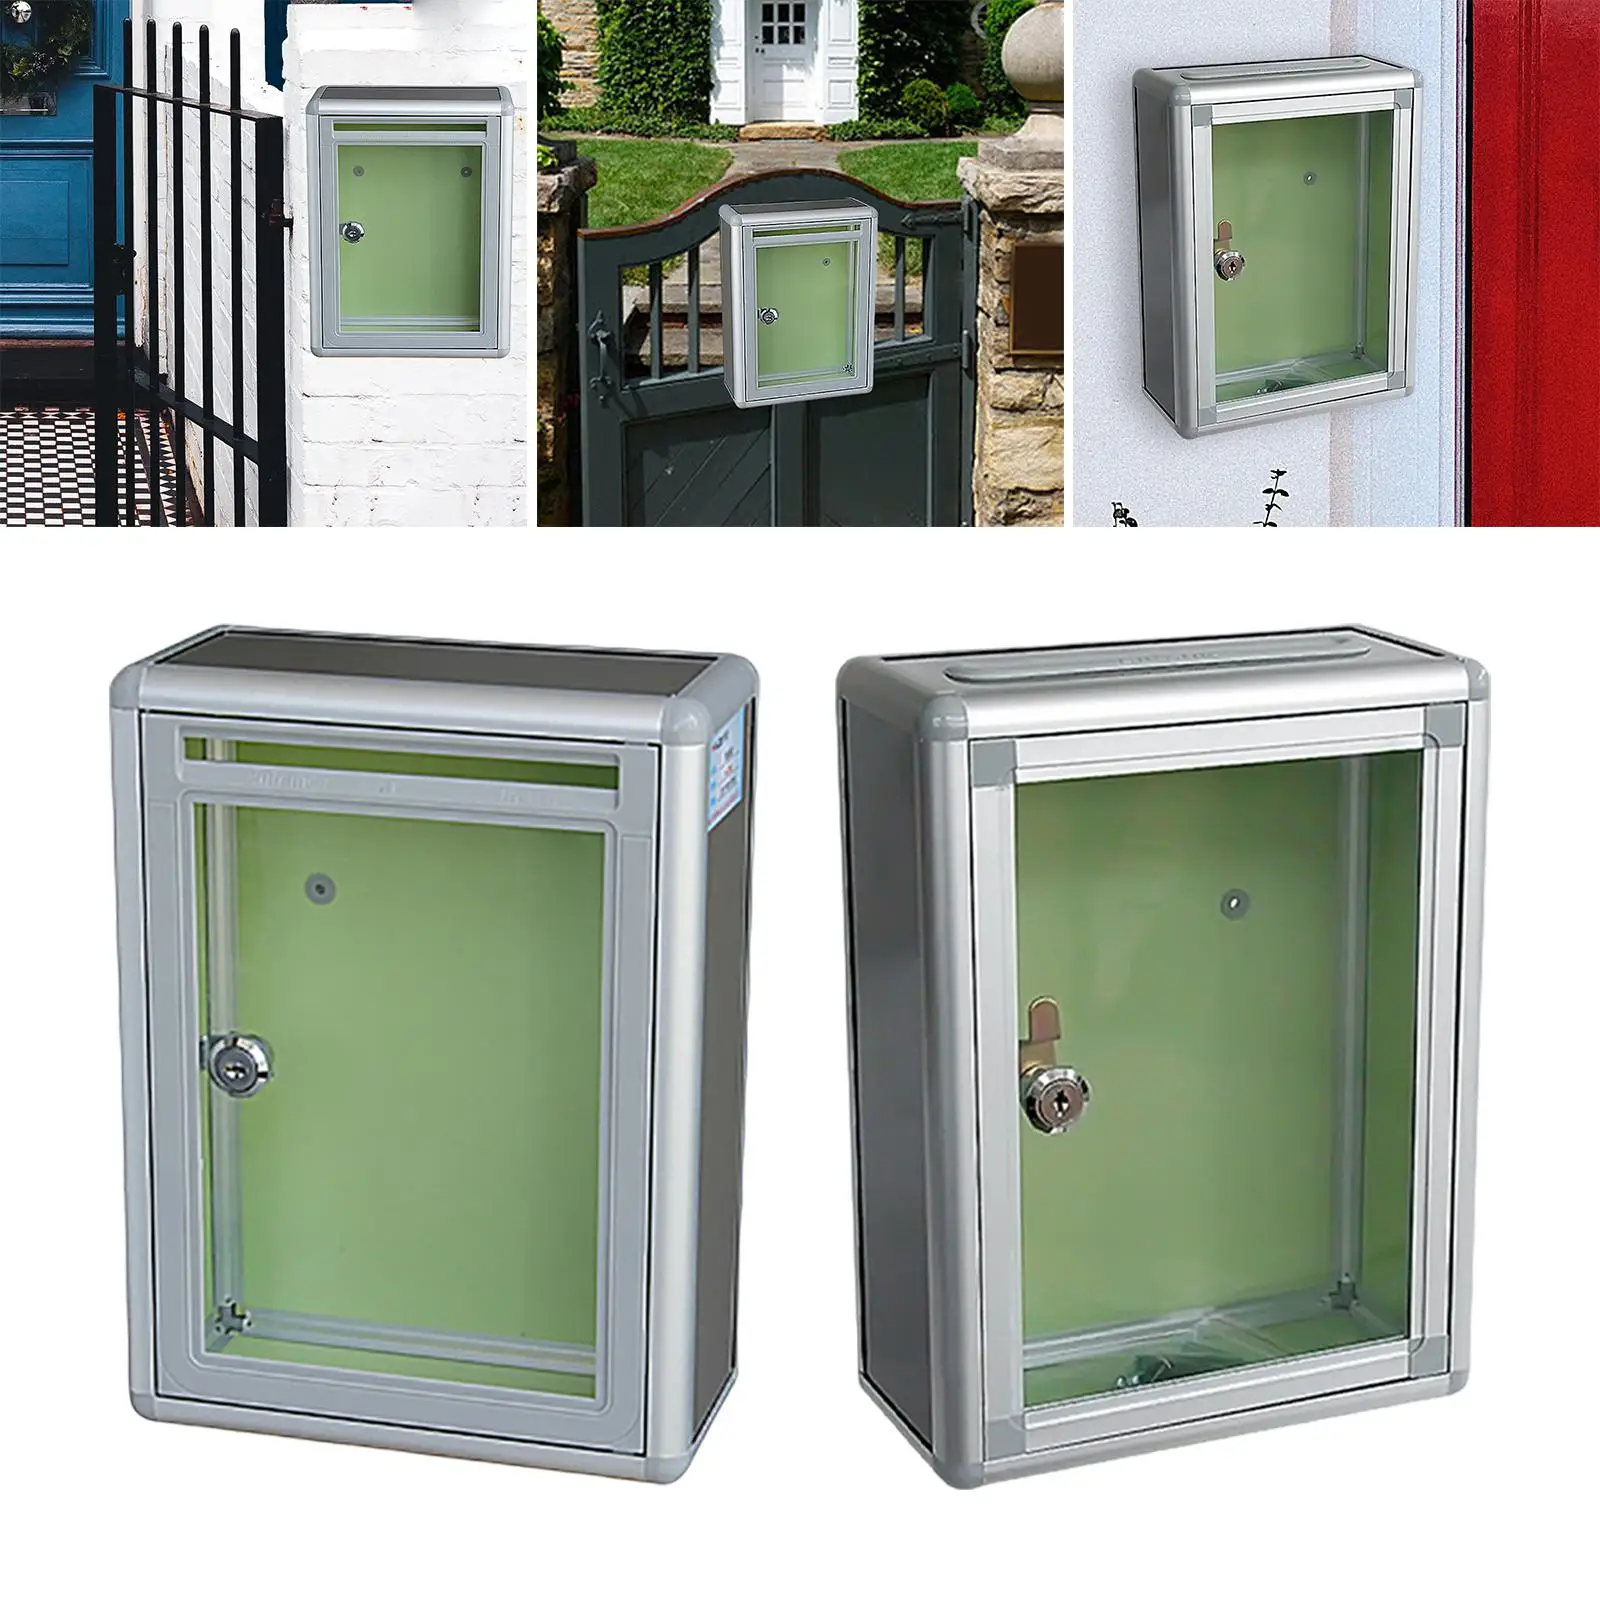 Lockable Wall Mounted Mailbox Decorative Metal for Porch Outside Decor